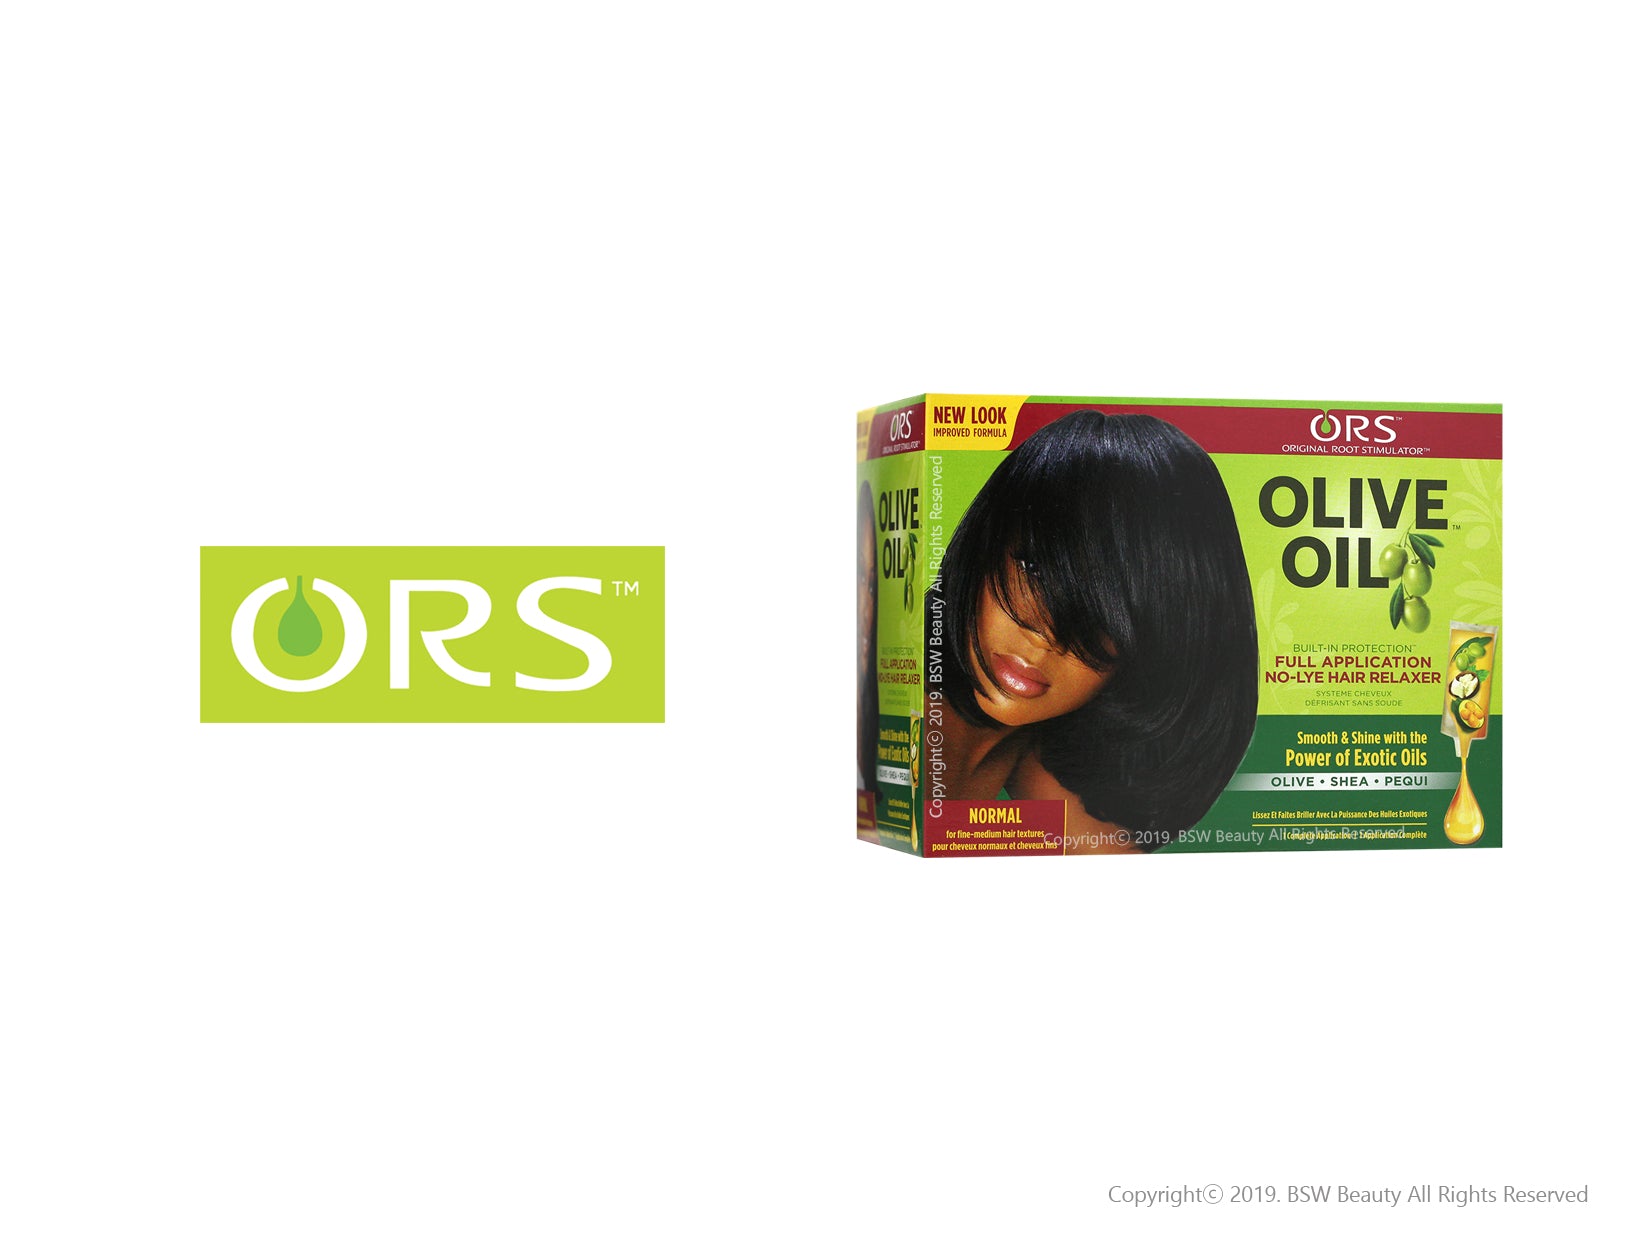 ORS OLIVE OIL BUILT IN PROTECTION FULL APPLICATION NO LYE HAIR RELAXER